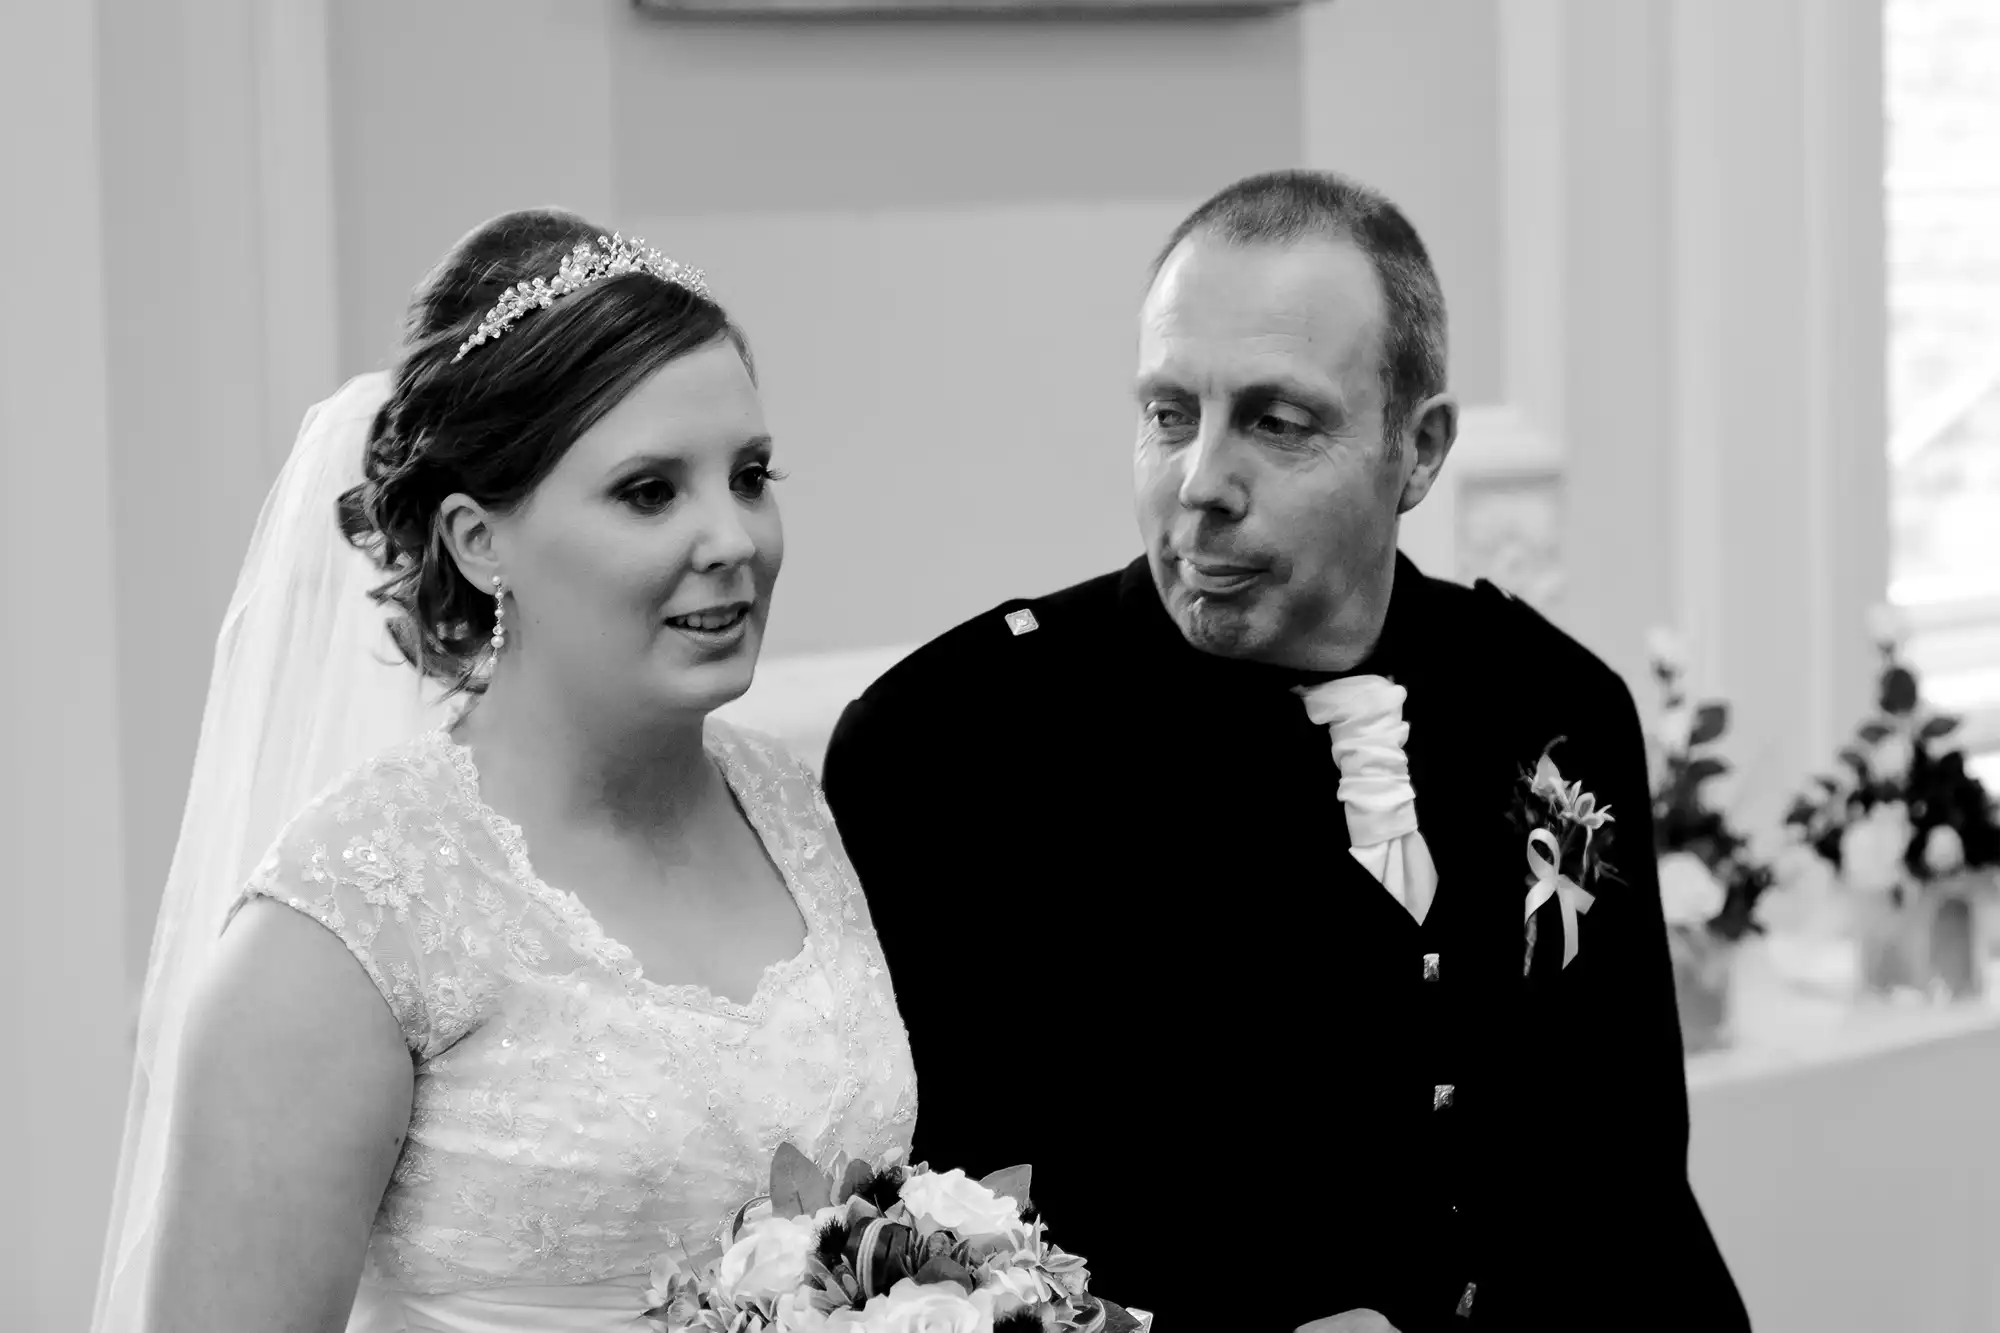 A bride in a white lace gown and a man in a black suit with an orange ribbon pose together, smiling in a black and white photo.